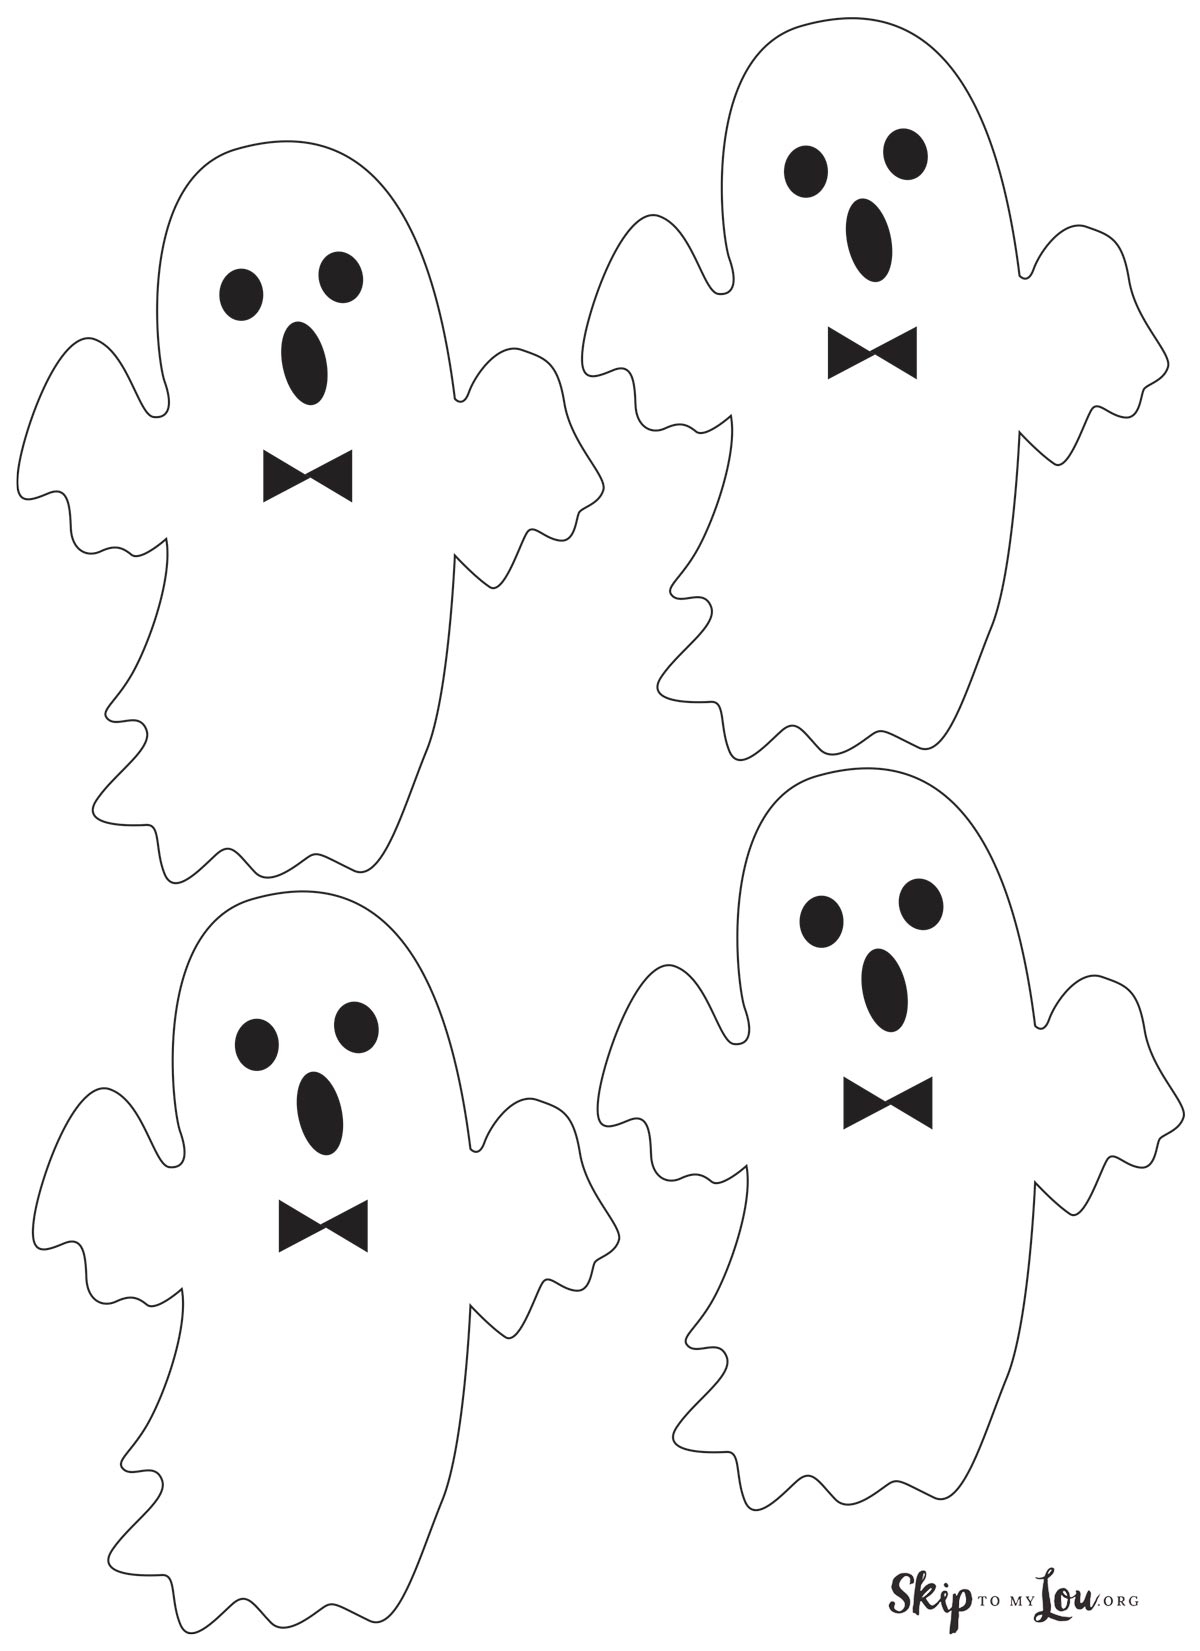 4 bow tie ghost template